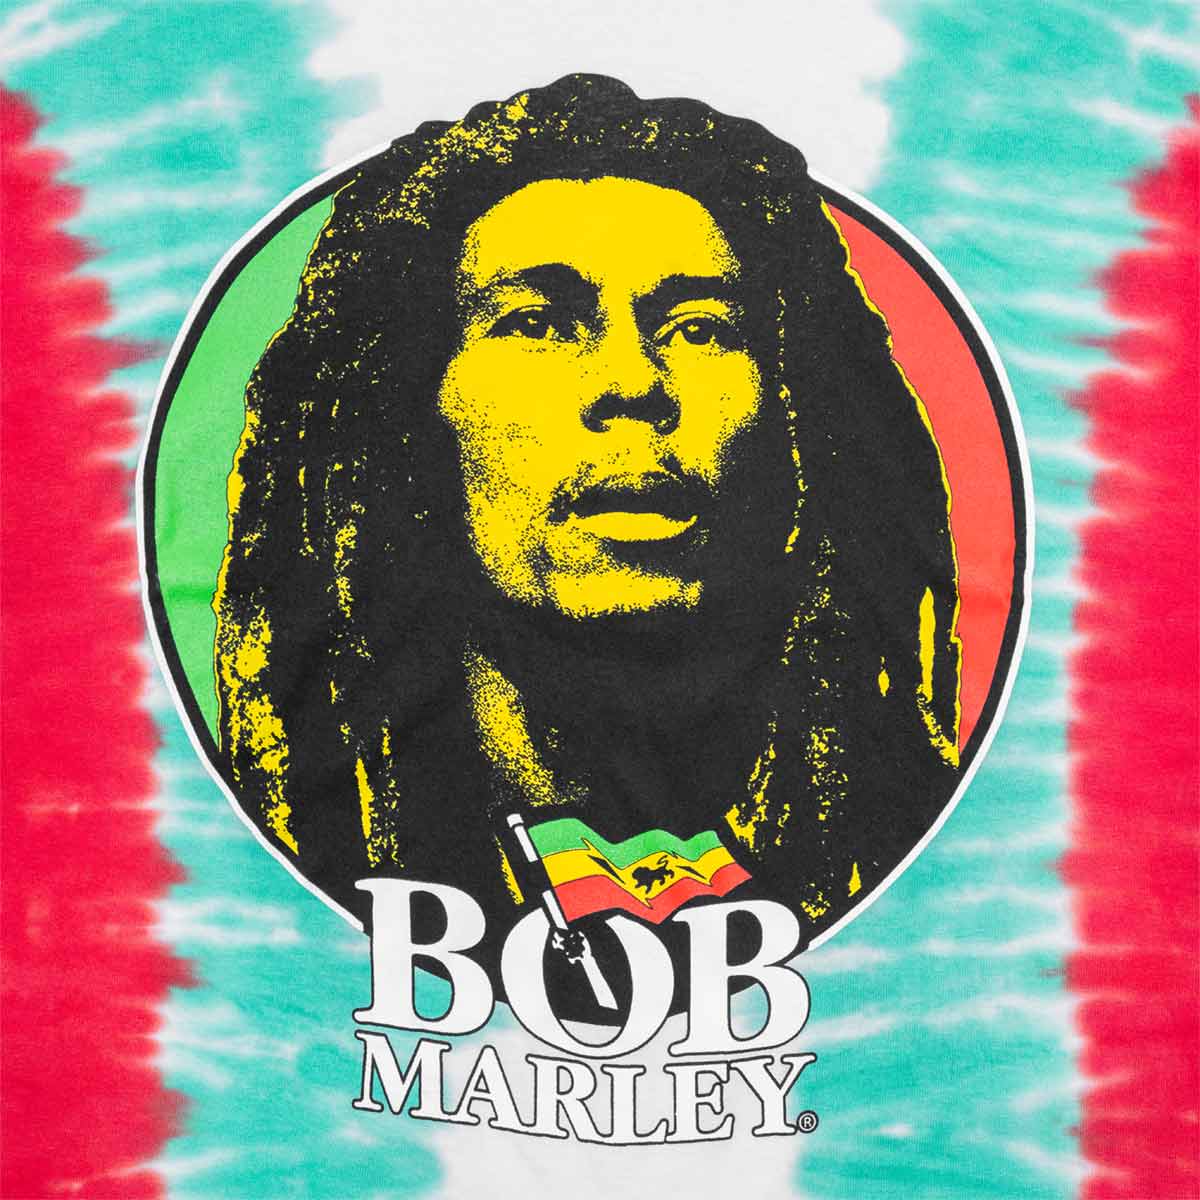 Bob Marley Adult Fit Tee with Tie Dye Design White image number 5